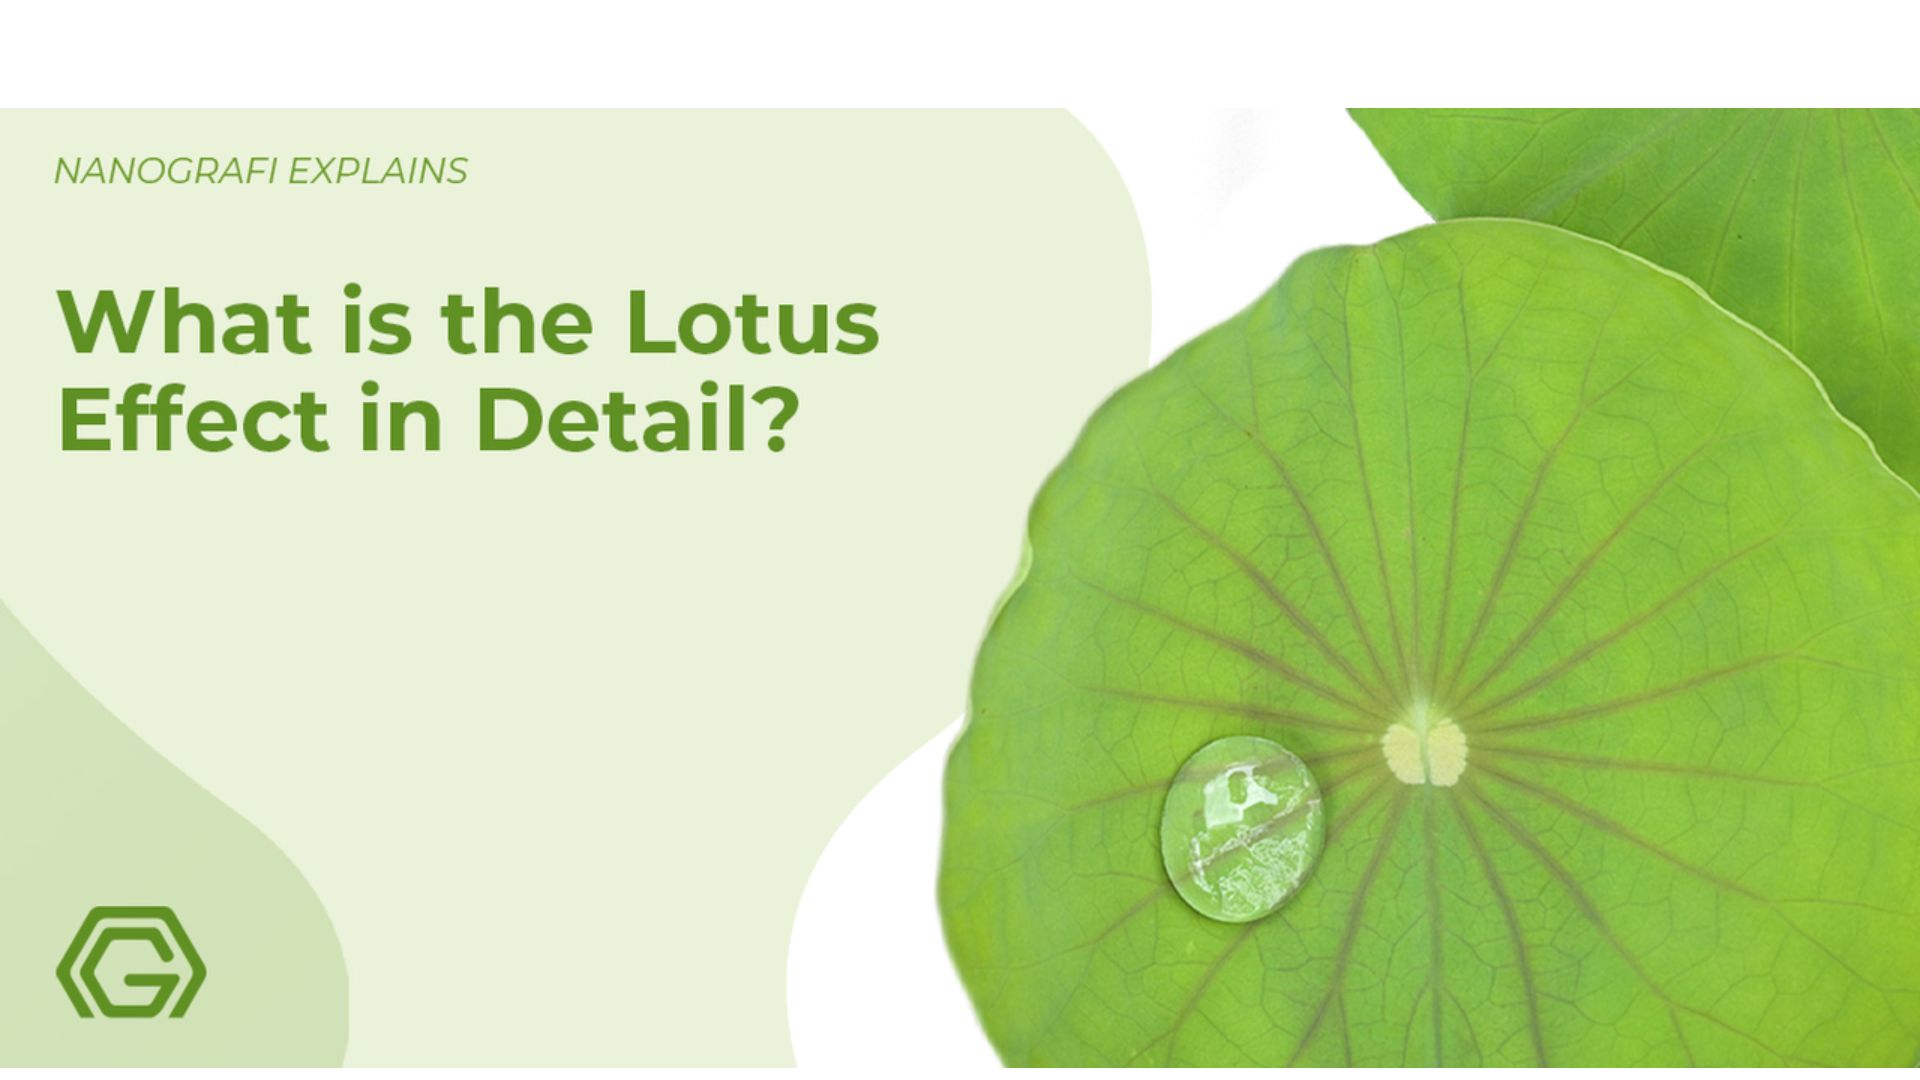 What is the lotus effect in detail?